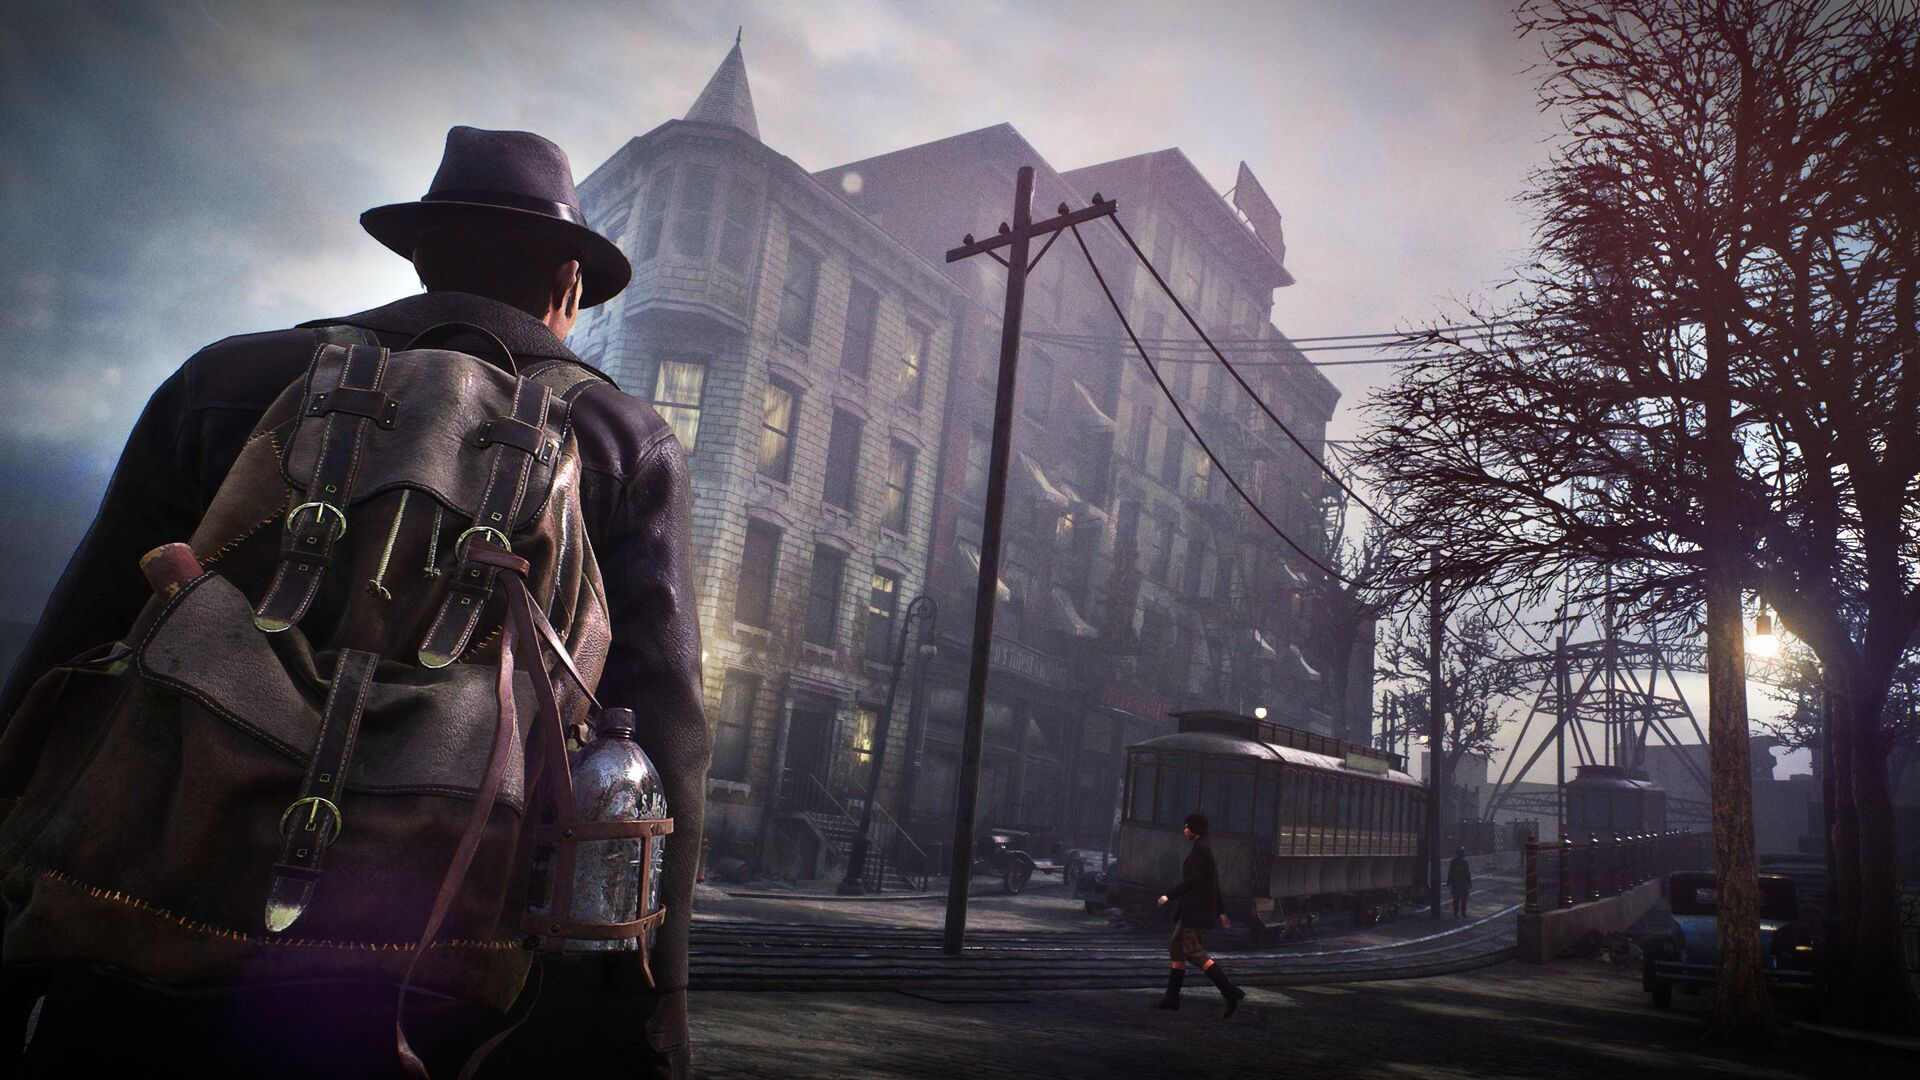 download the sinking city 2 for free